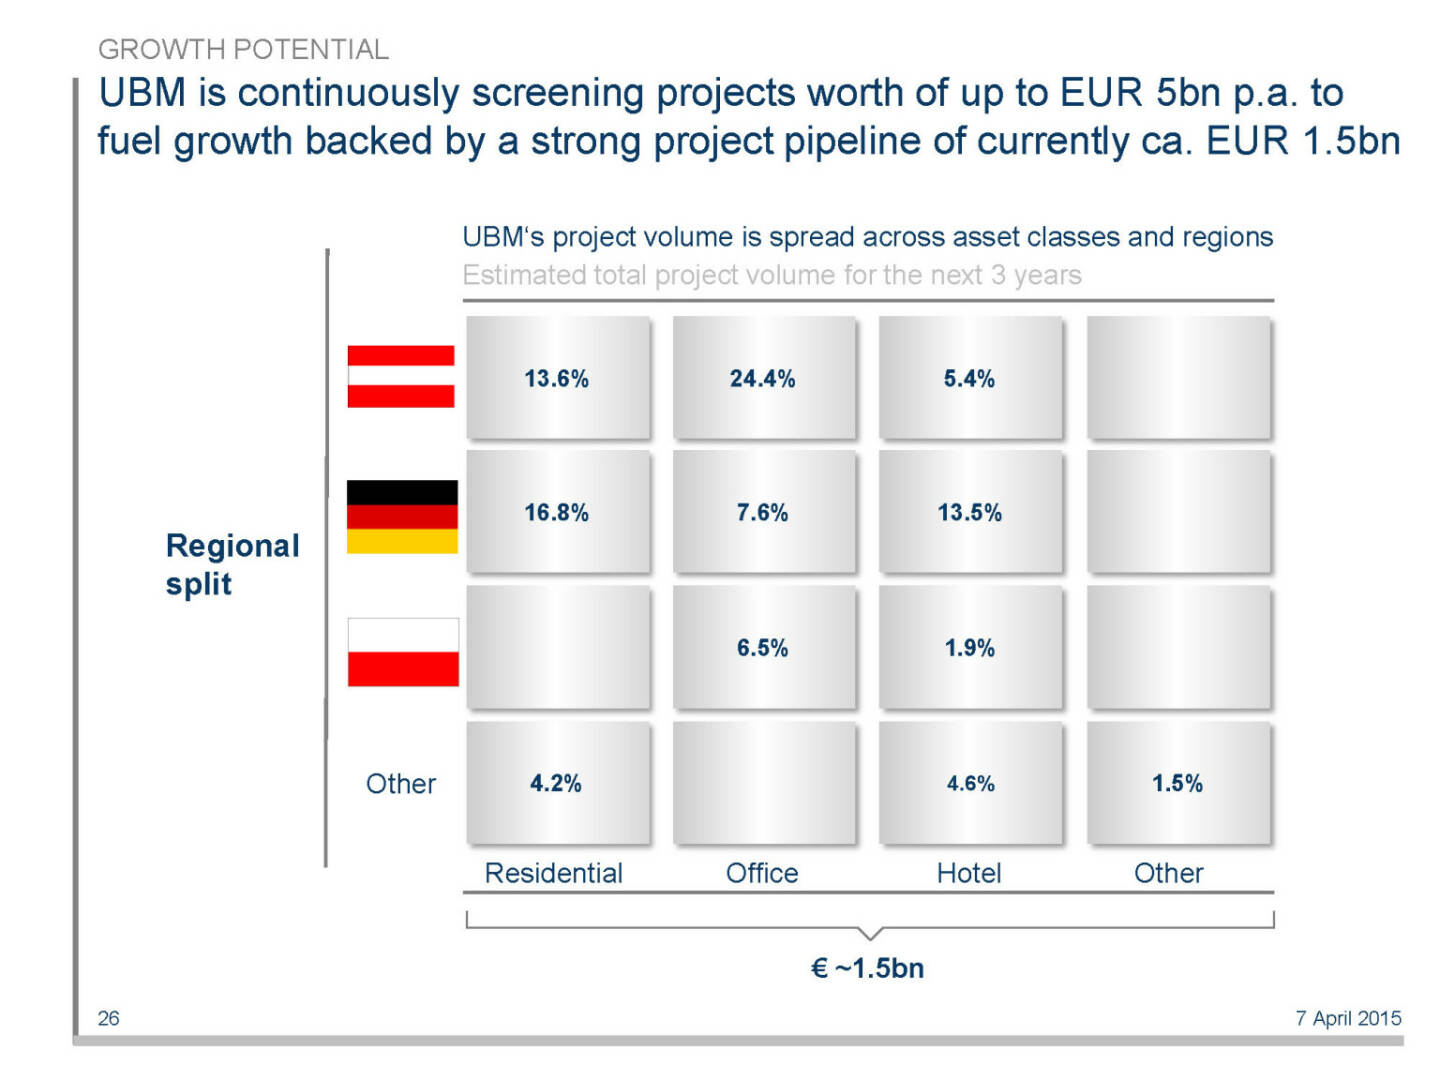 UBM is continuously screening projects worth of up to EUR 5bn p.a. to fuel growth backed by a strong project pipeline of currently ca. EUR 1.5bn